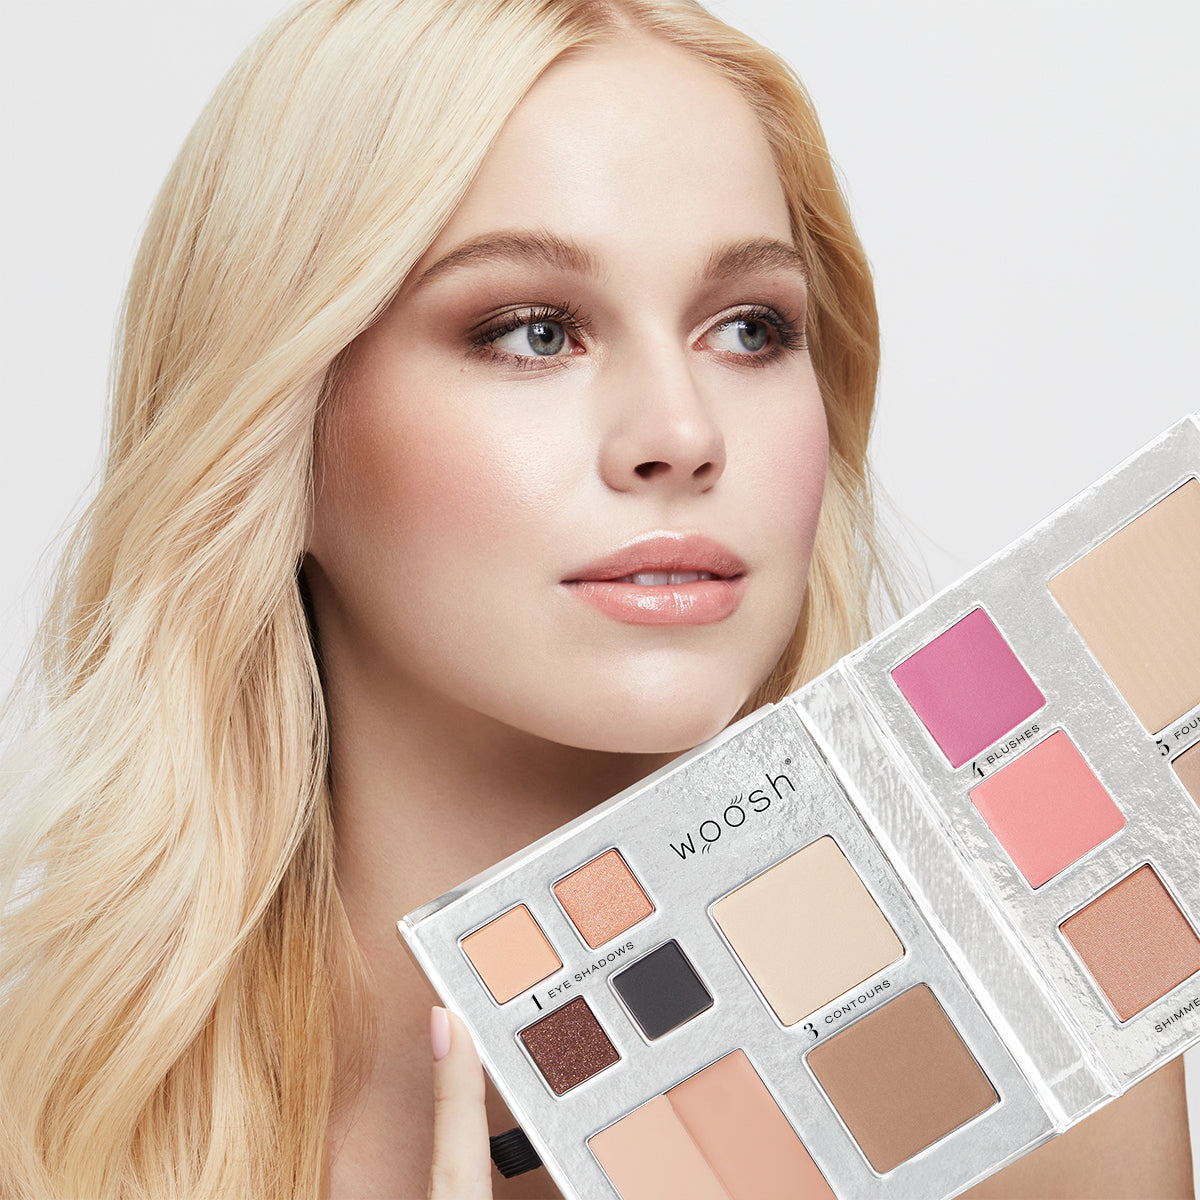 Blonde Model holding the 13 pan Fold out Face palette that includes Eyeshadow, cream concealer, contour, blush, highlight, and foundation powders.